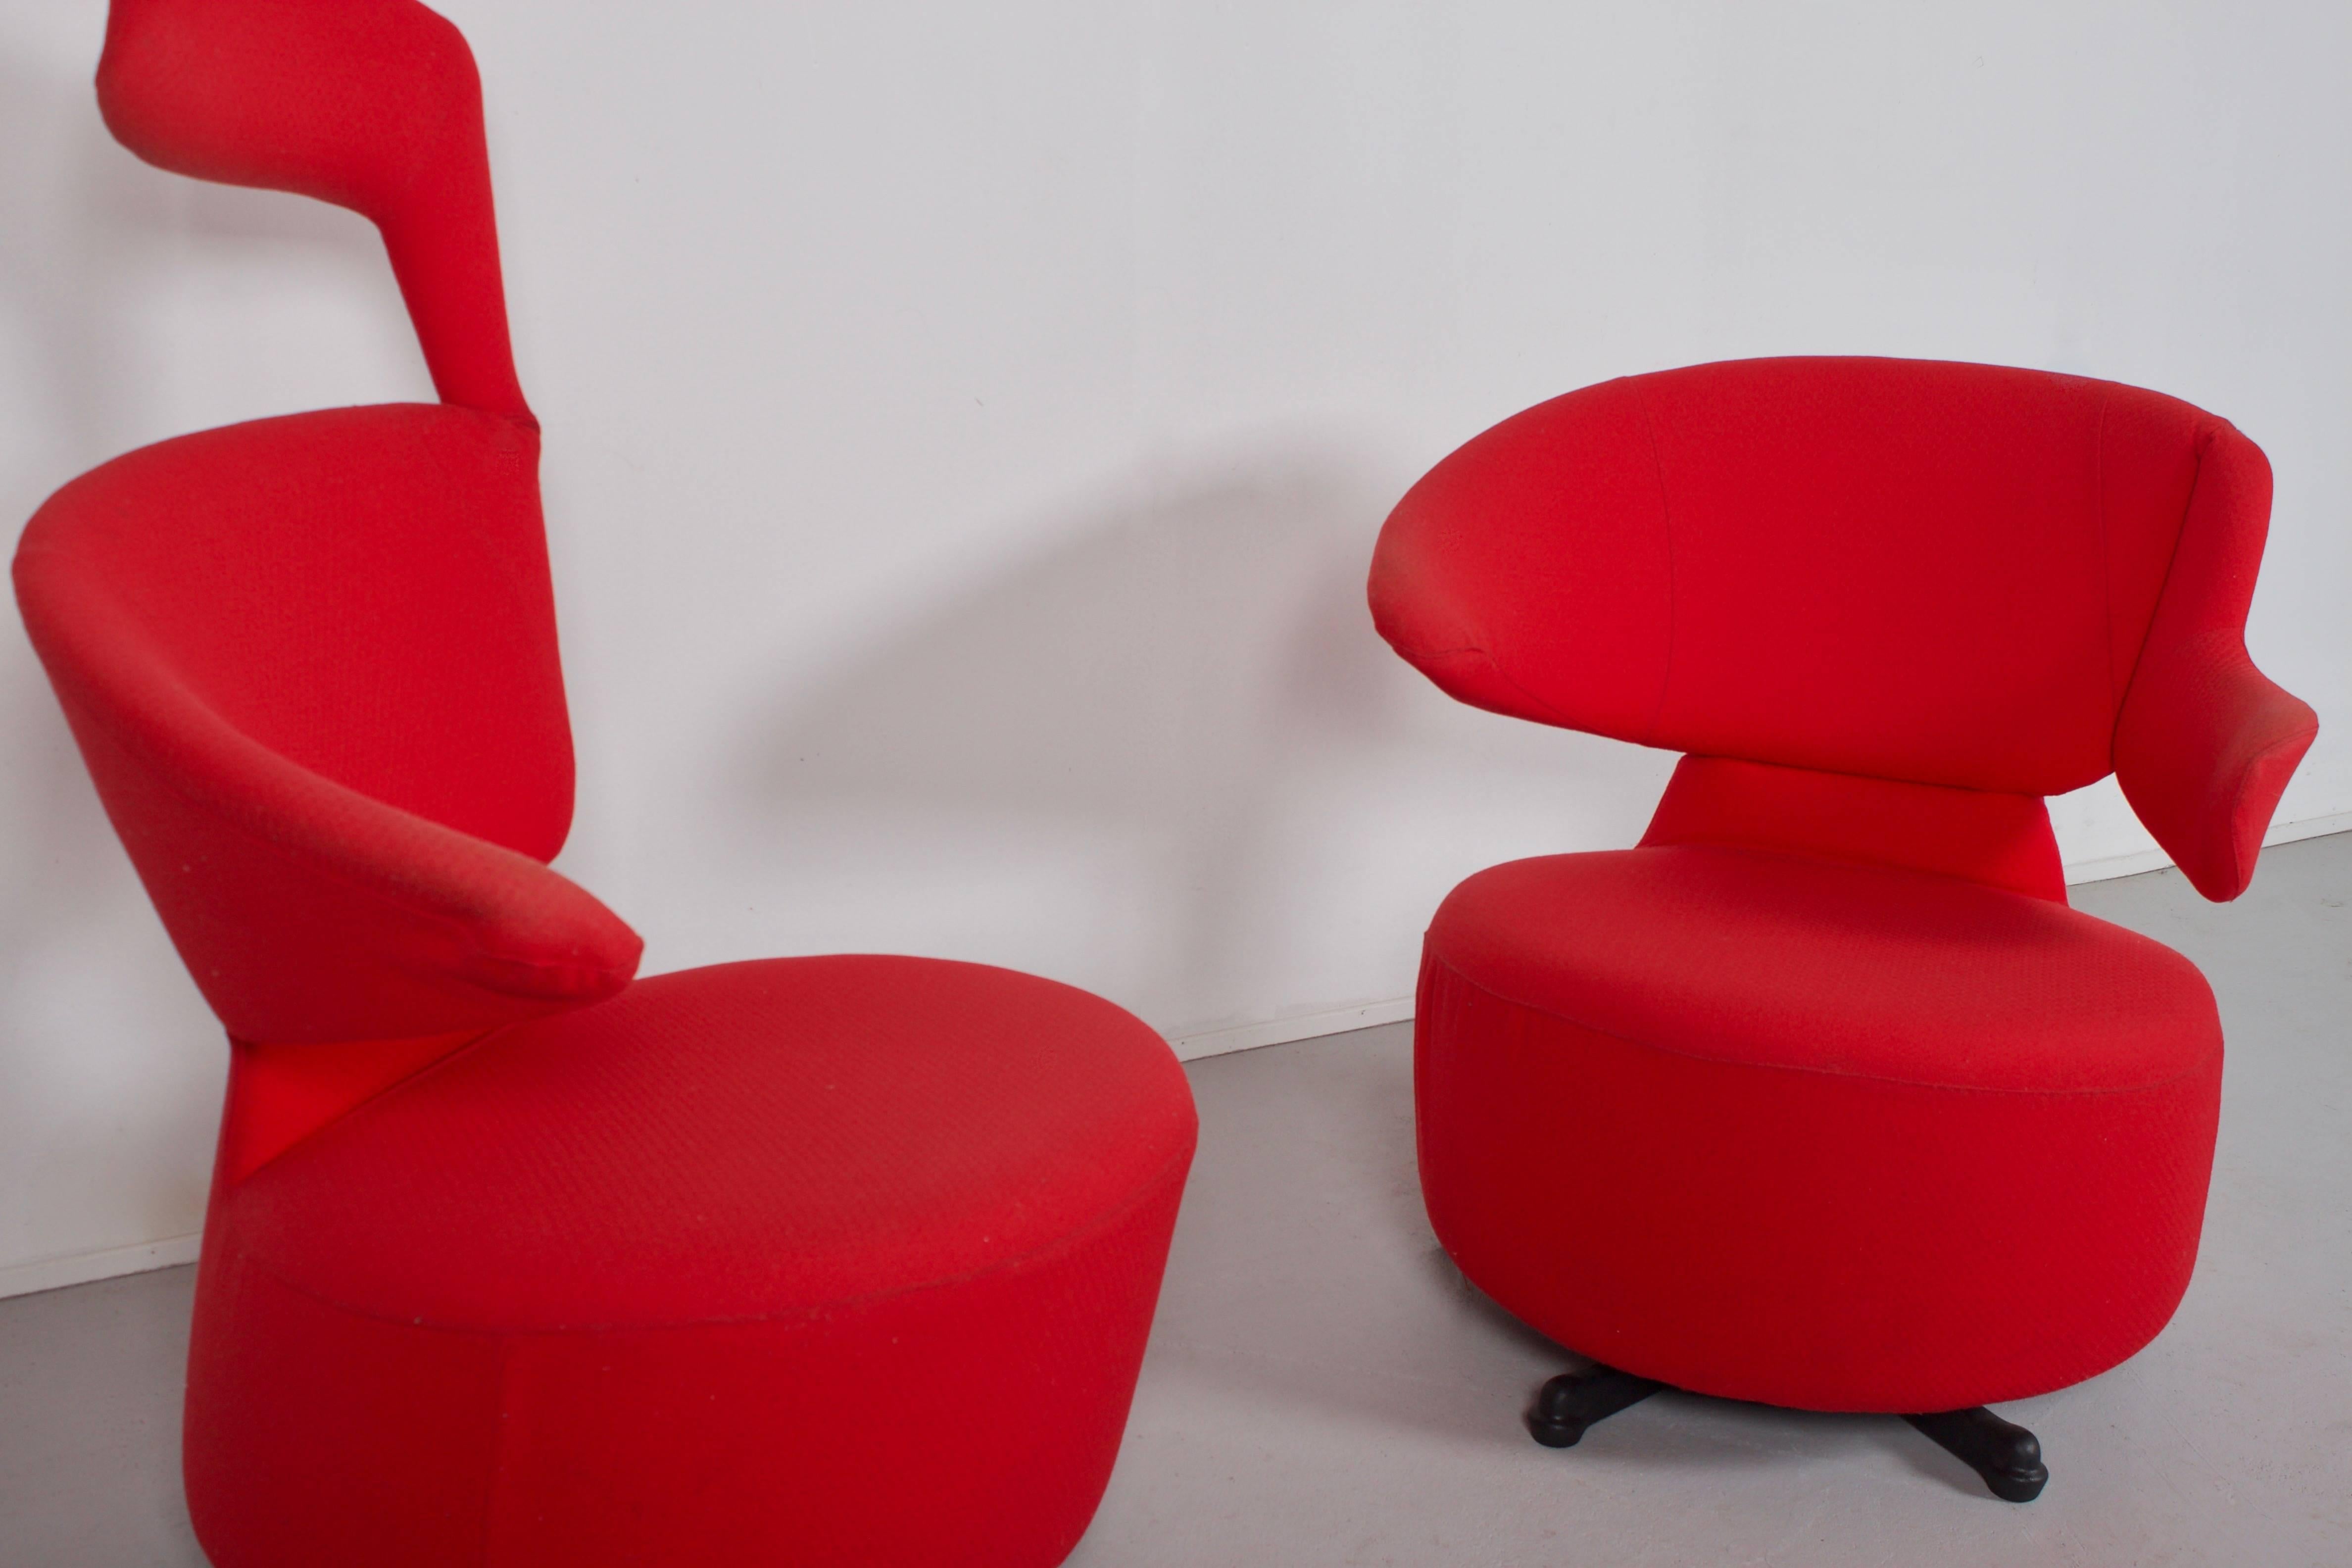 Swivel armchairs by Toshiyuki Kita by Cassina in good condition.

Red removable fabric cover.

Steel base with moulded black polyurethane casting.

The right arm can move upwards and can be used as a headrest.

Also, see our set of 'Biki' chairs in